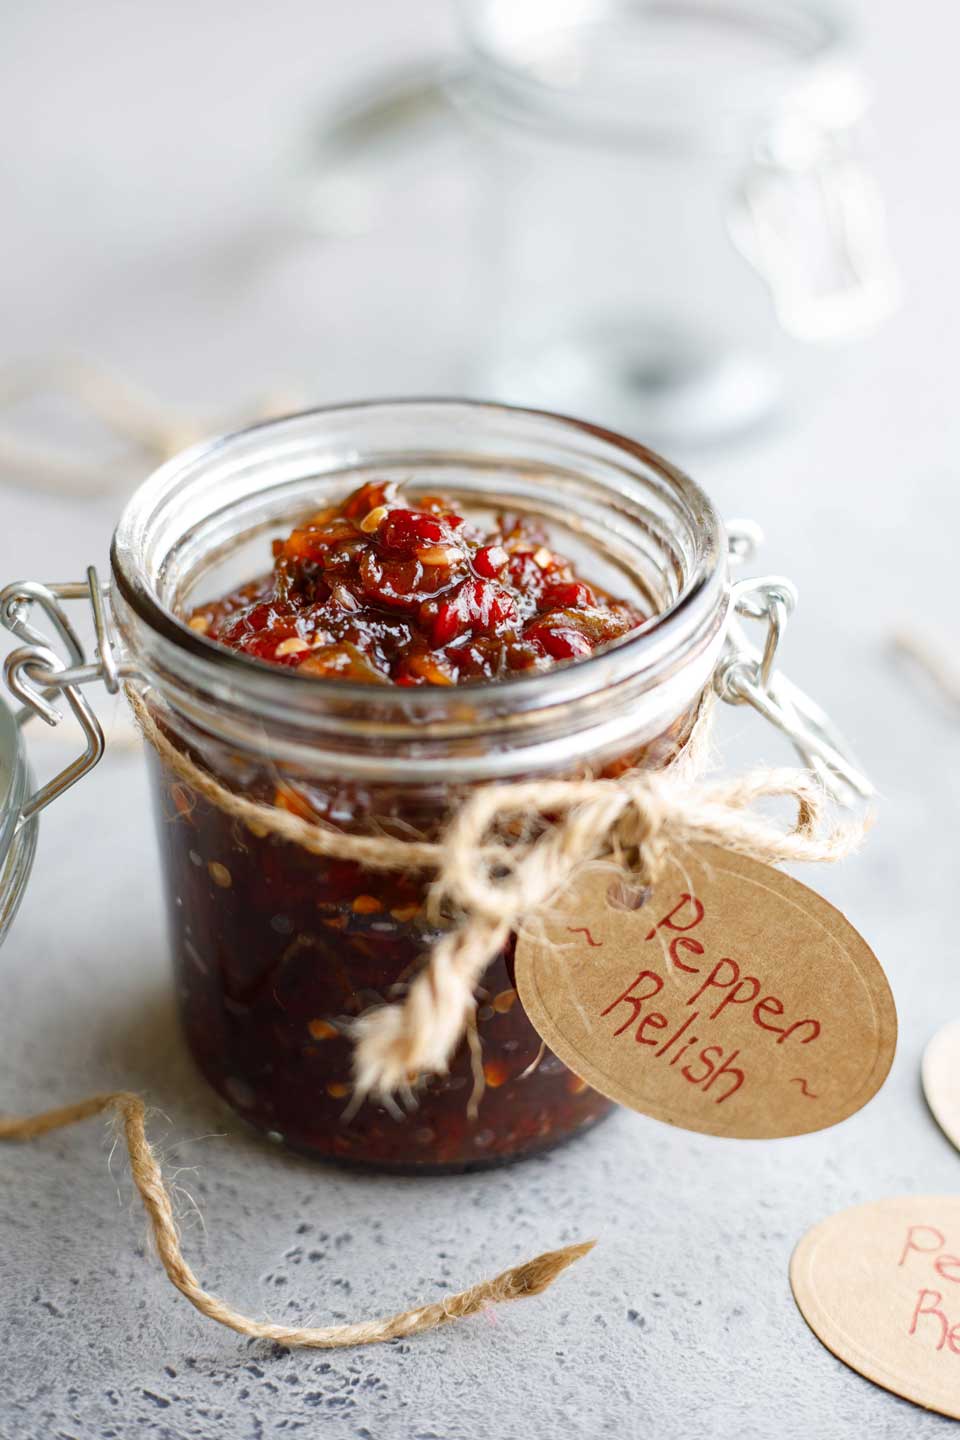 Recipe presented in a canning jar with brown string tied around and a gift tag reading "Pepper Relish".